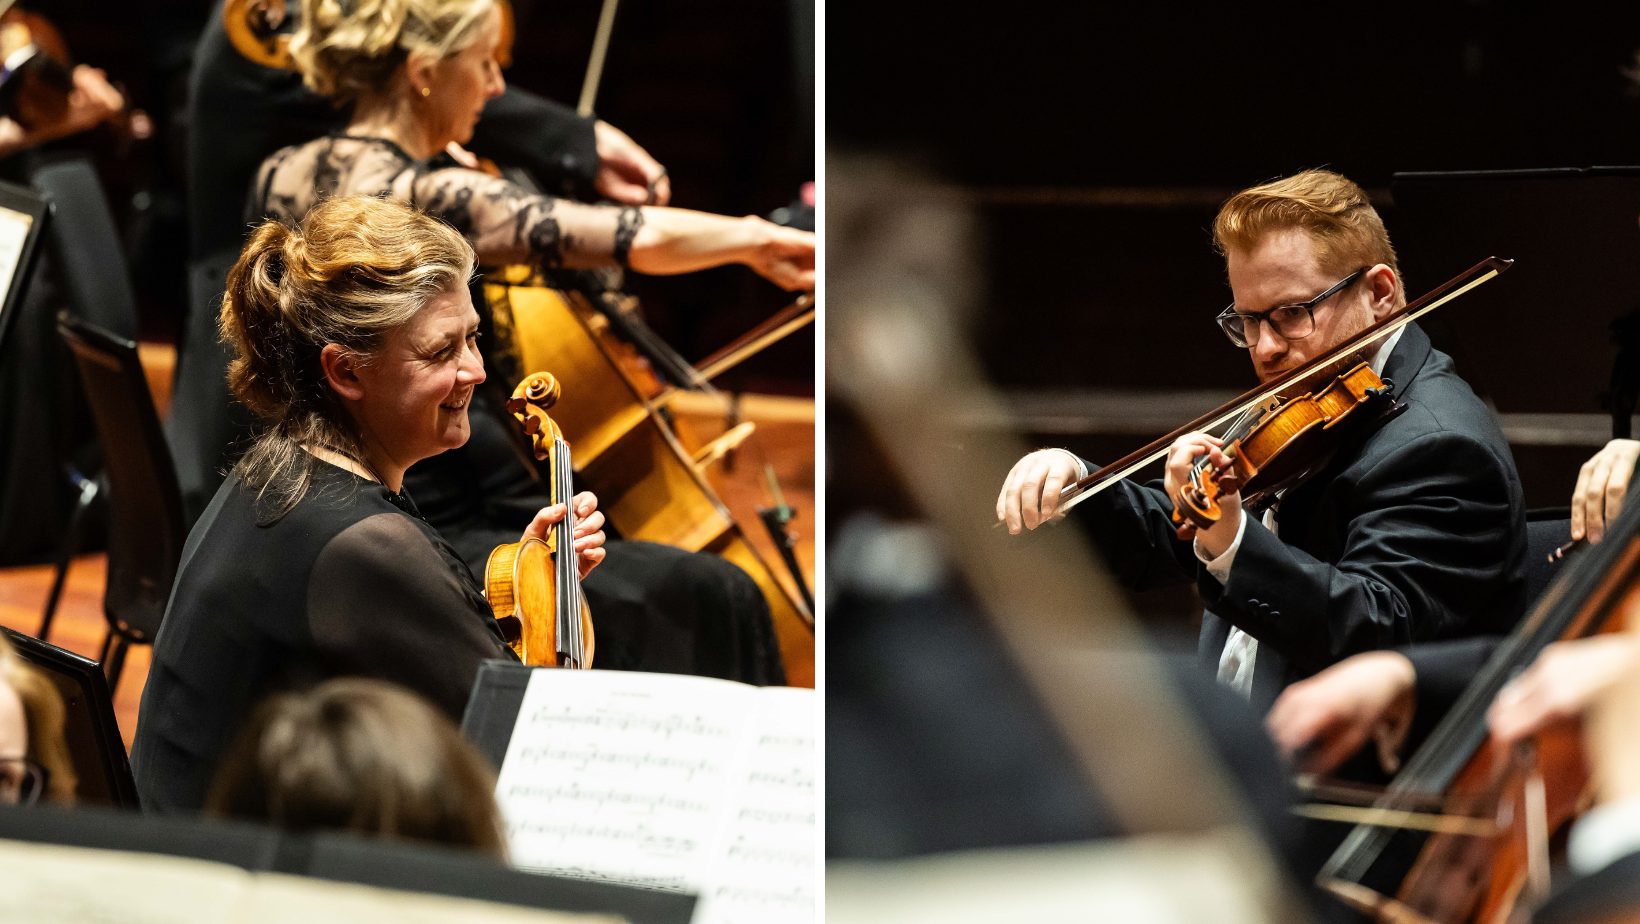 RSNO appoints Kirstin Drew and Colin McKee to Violin section